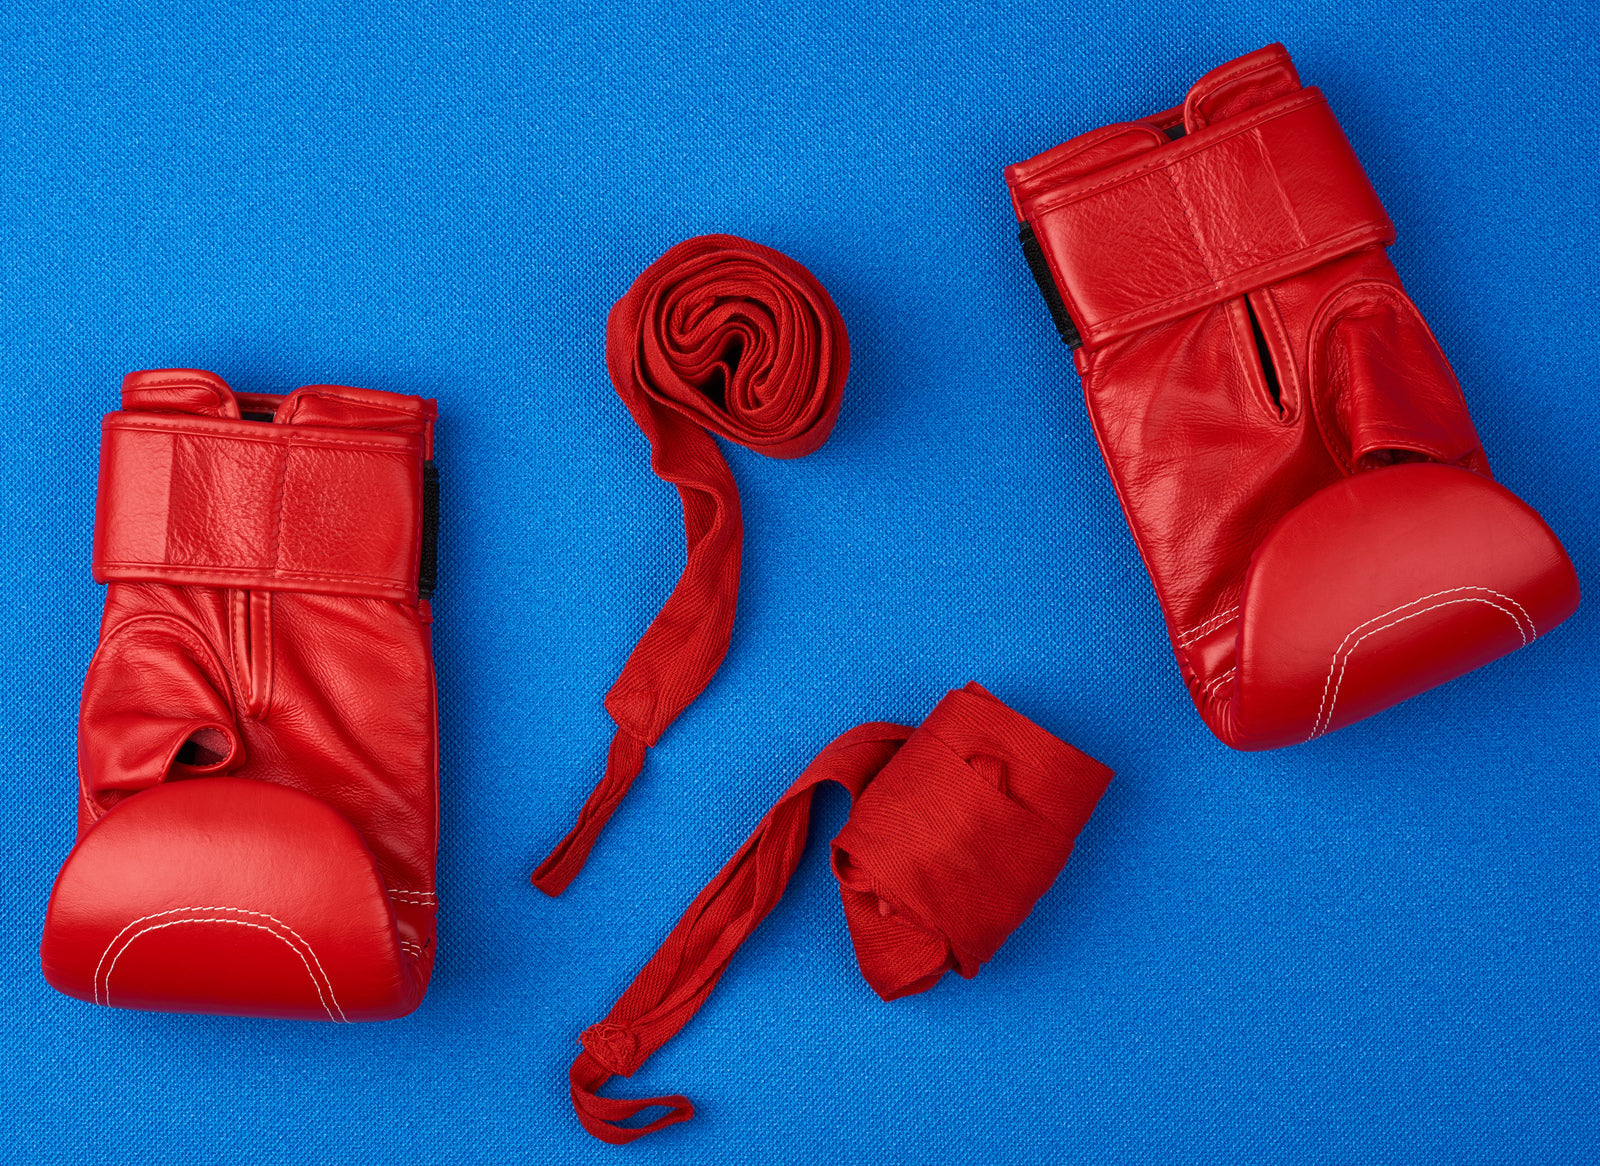 Can Boxing Gloves be washed?